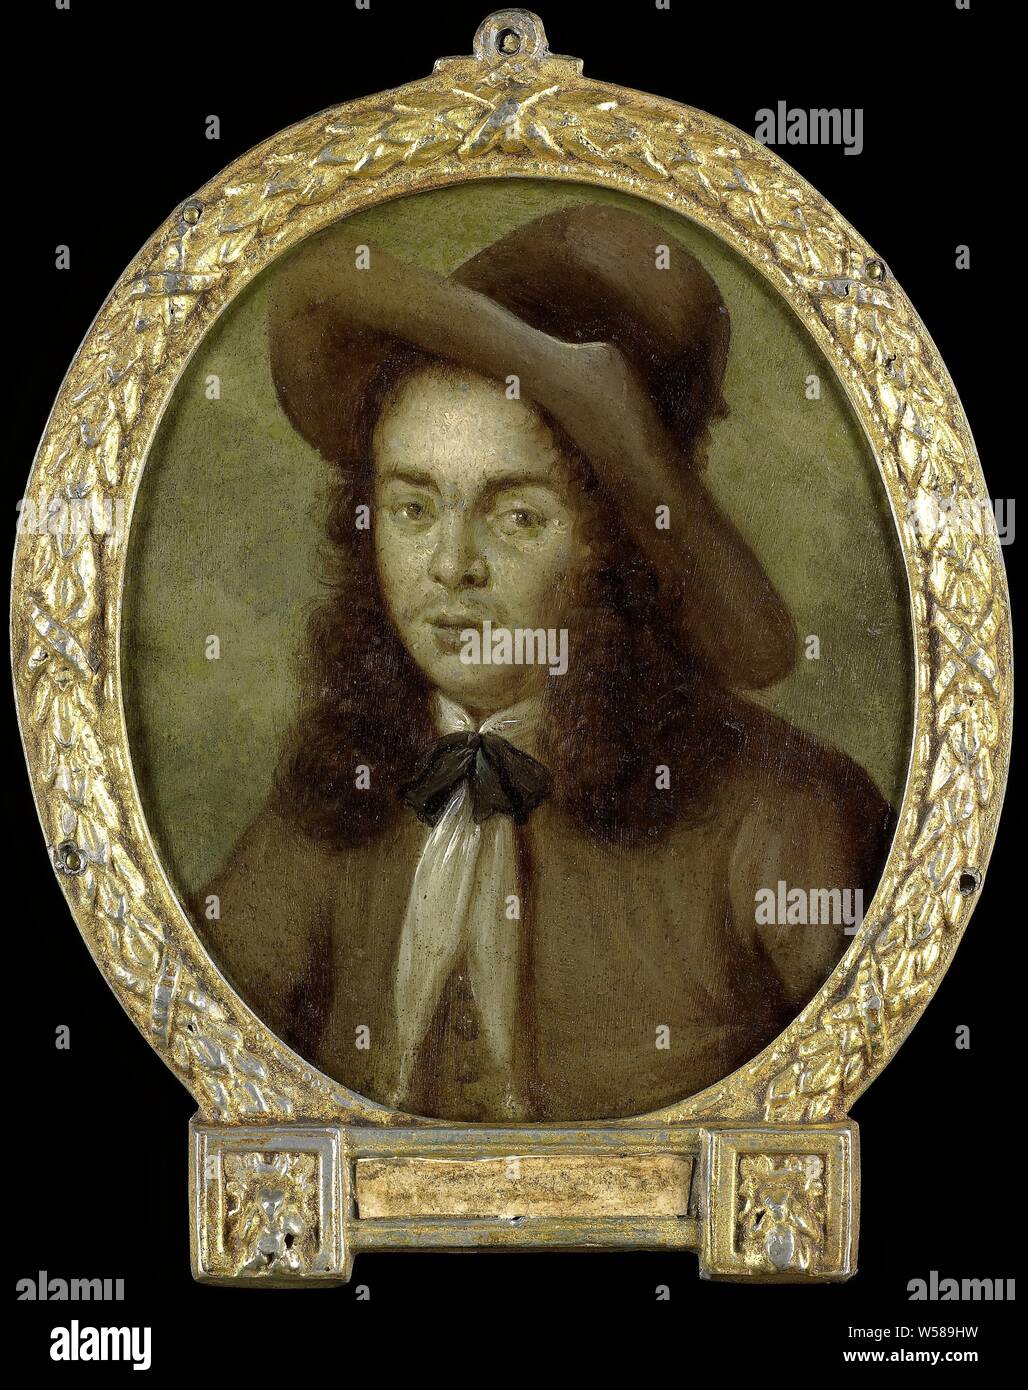 Portrait of Aernout van Overbeke, Explorer and Poet, Portrait of Aernout van Overbeke (1632-74). Traveler and poet. Bust in oval, facing the face. Manufactured to an unknown example. Part of a collection of portraits of Dutch poets, portrait of a writer, writer, poet, author, Aernout van Overbeke, Jan Maurits Quinkhard, 1732 - 1771, copper (metal), oil paint (paint), h 11 cm × w 9.5 cm h 41 cm × w 47.4 cm × d 1.6 cm Stock Photo